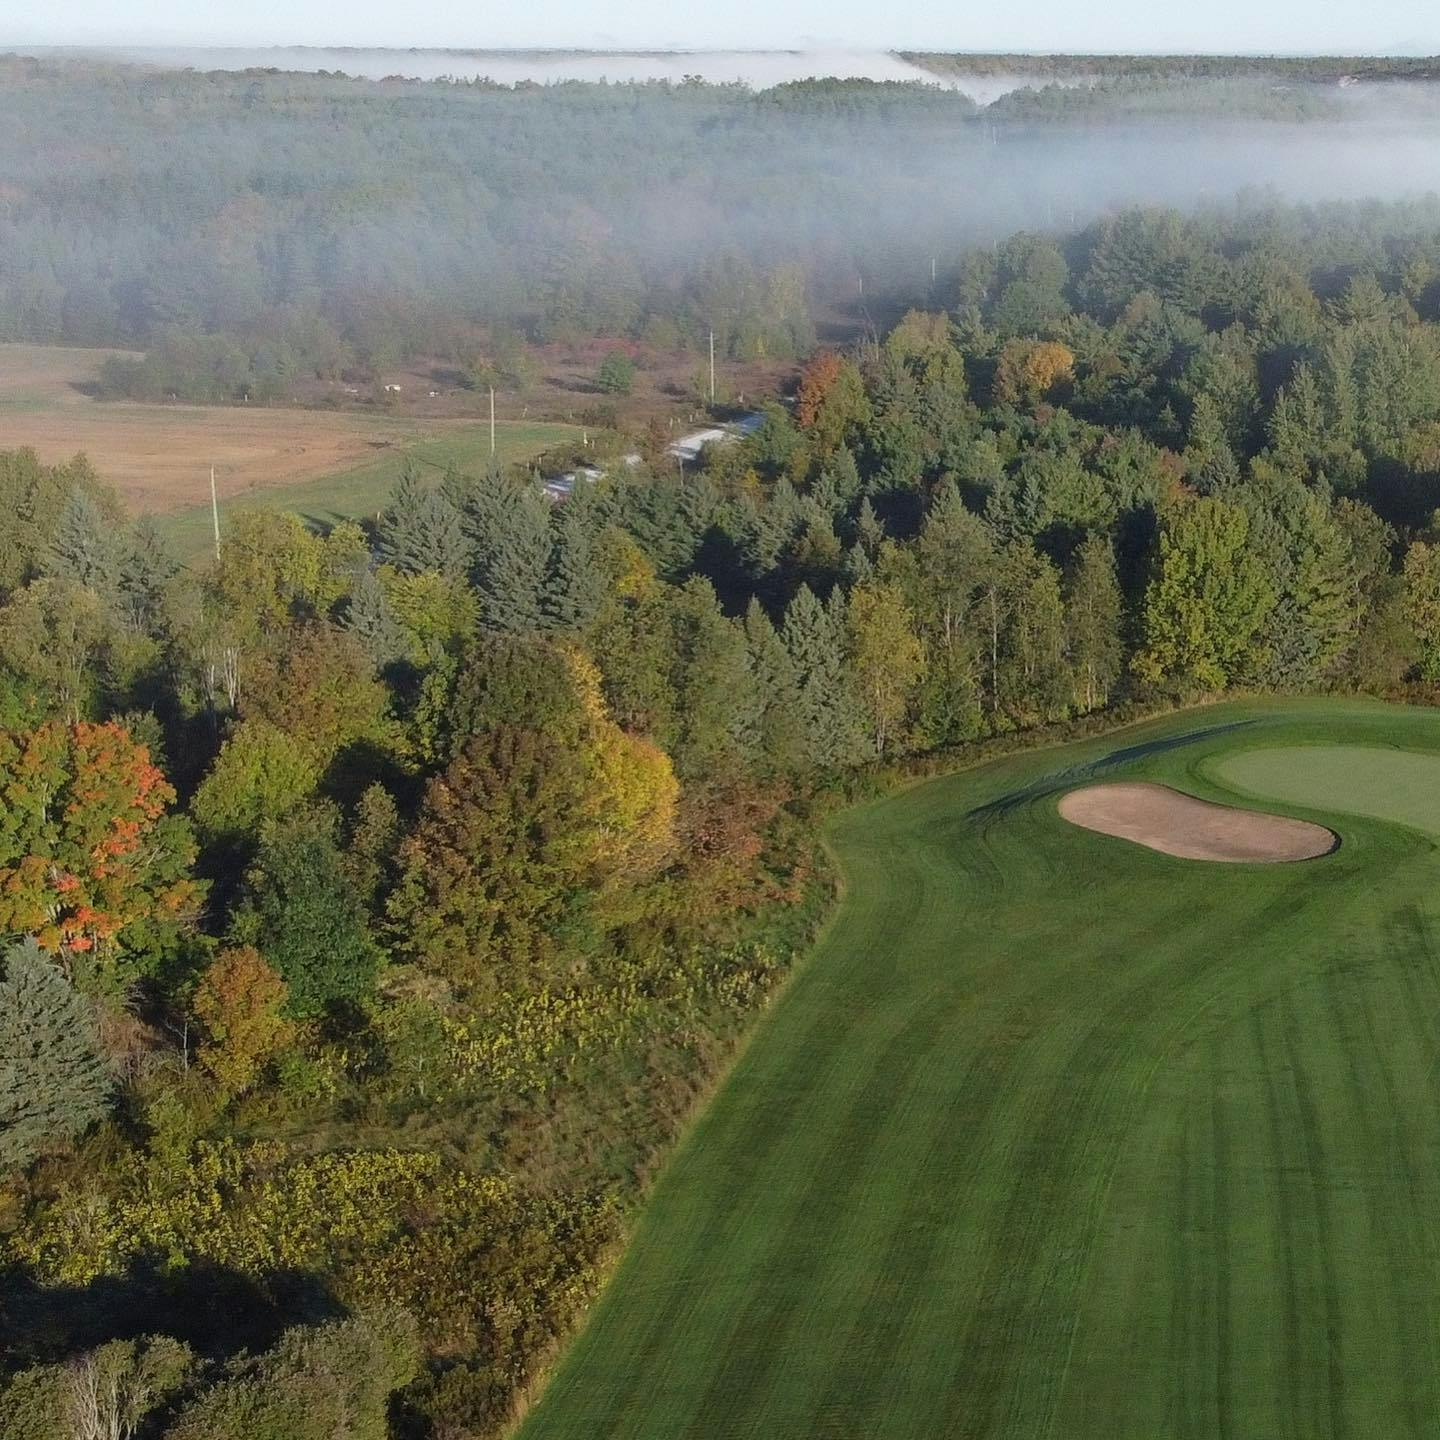 Happy @rbccanadianopen week 🇨🇦

The back nine at this years host @oakdalegolfandcountryclub was designed by Robbie Robinson. 

Robinson designed the south course here, as well as 2 and 5 north. The new holes on the north opened in 1968, and the south course opened in 1972. 

Robinson was inducted into the Canadian Golf Hall of Fame in 2002:

“Clinton E. Robinson, better known as Robbie, loved the game of golf and spent his life bringing it to the masses.  A golf course architect who apprenticed under the legendary Stanley Thompson, Robinson designed or remodelled more than 100 courses.  Perhaps his single most significant contribution to the game was in the study of turfgrass and the dissemination of this information through the establishment of the Canadian Turfgrass shows and as the Green Section director for the RCGA in the 1950’s.” 

#LSGHistory #PlayTheLake #GolfArchitecture